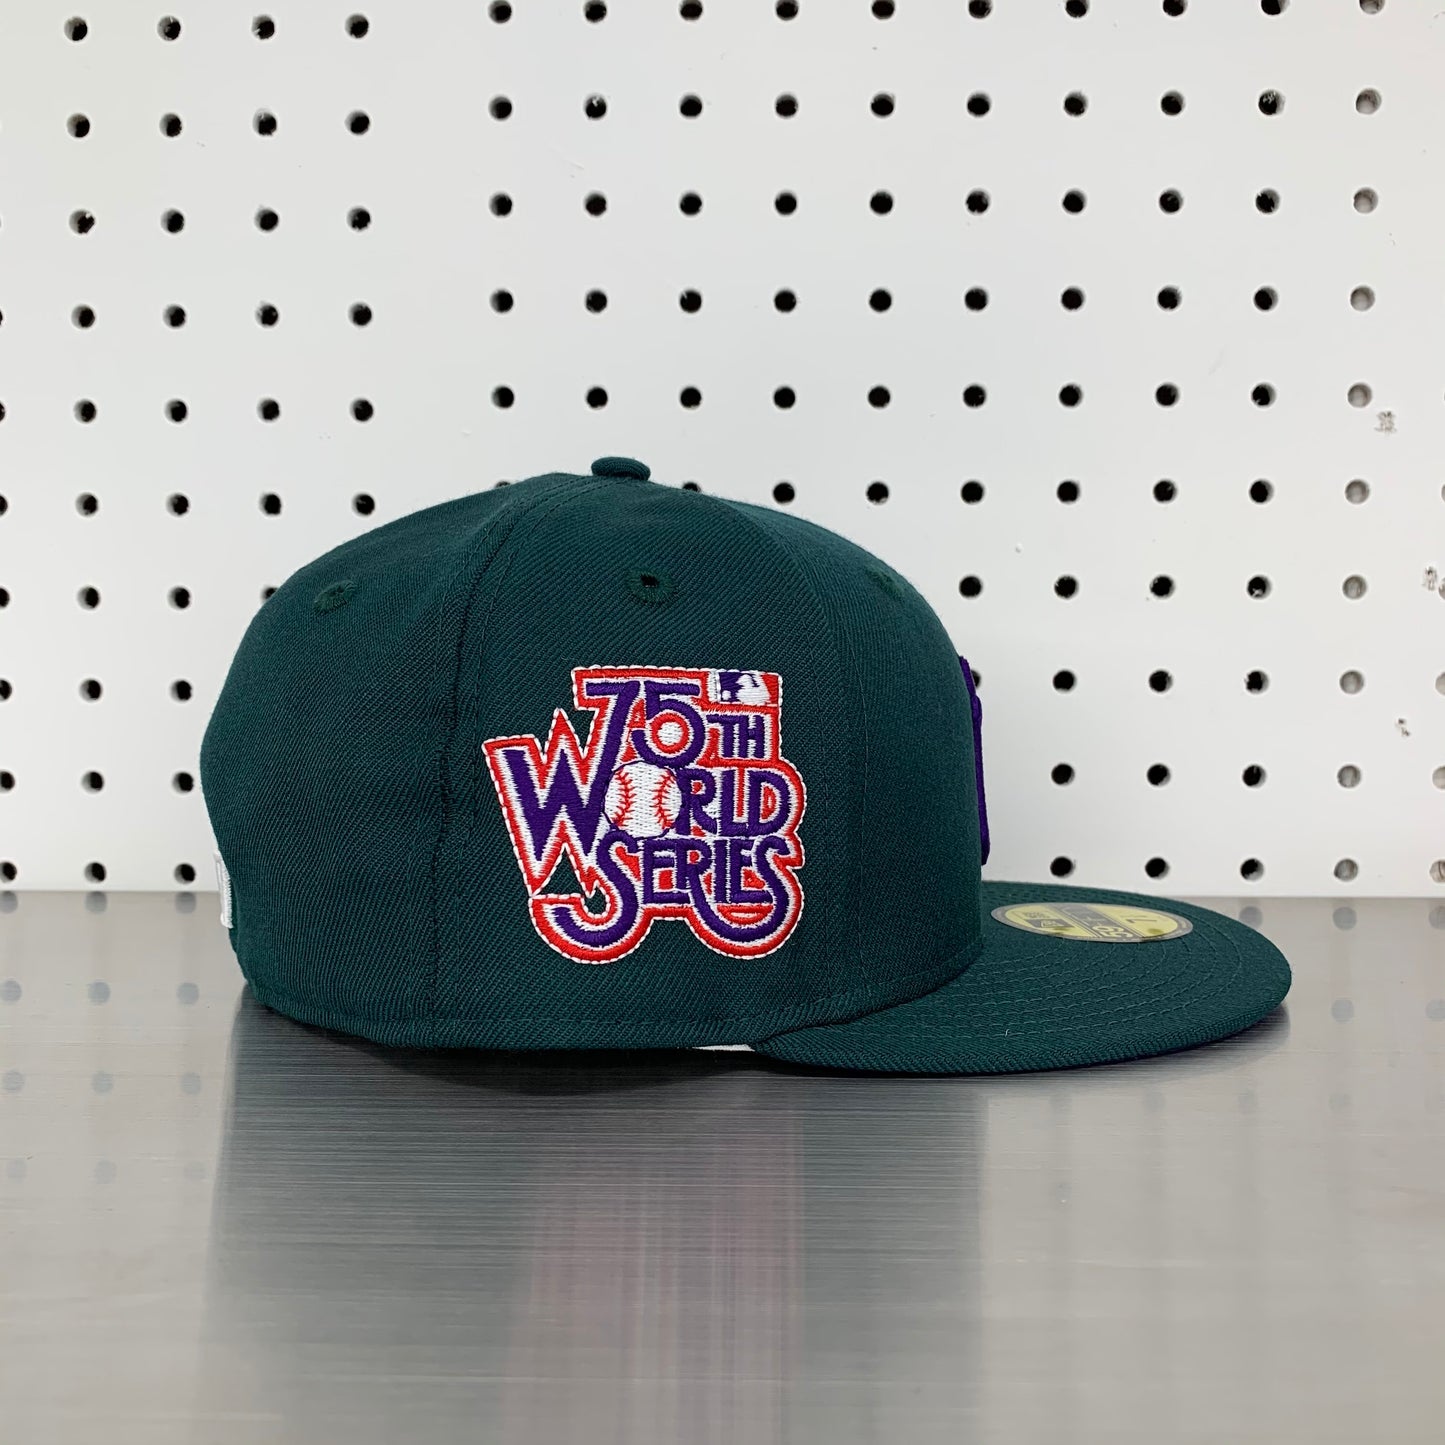 New York Yankees New Era 59FIFTY Fitted Cap "Green - 75th World Series"